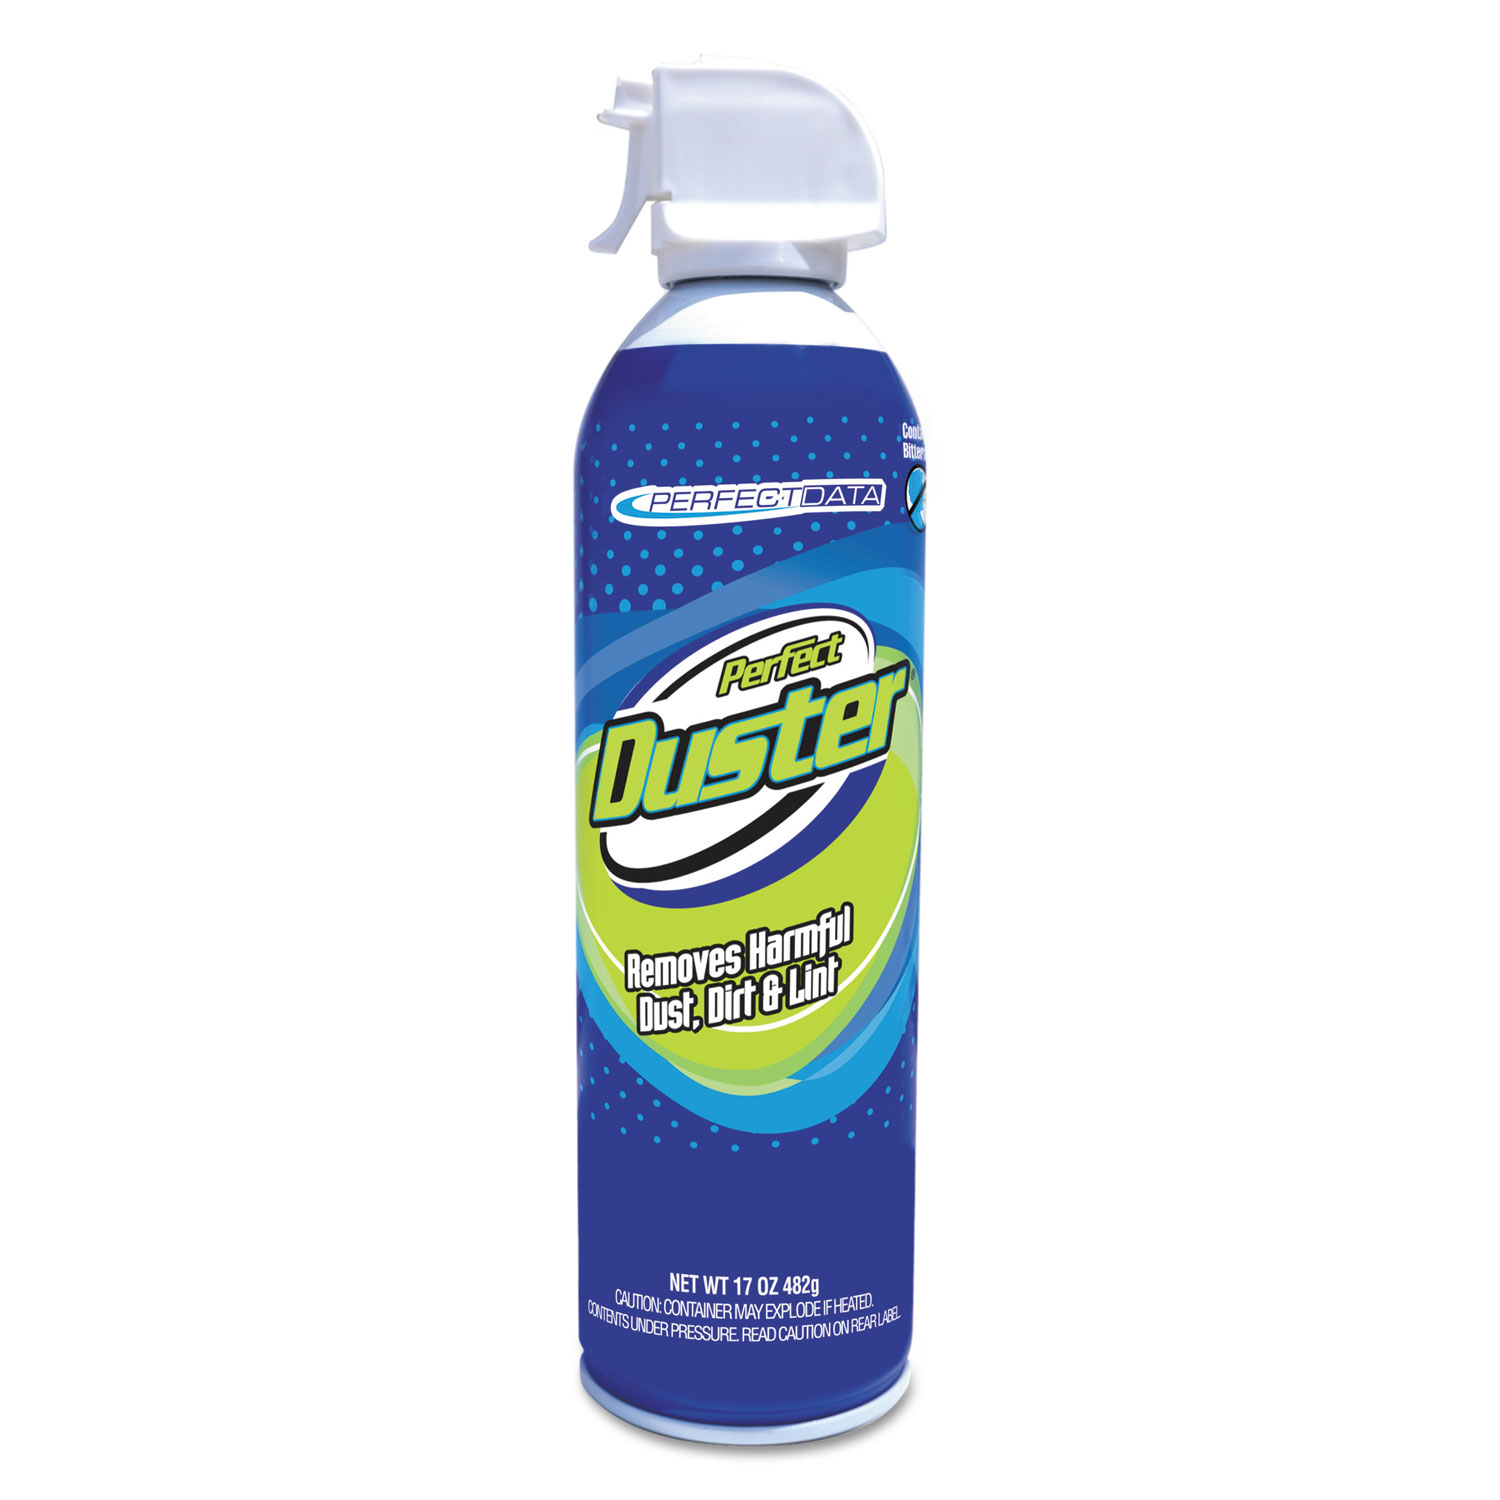  Perfect Duster 50501211 Power Duster, 17 oz Can (PDC50501211) 